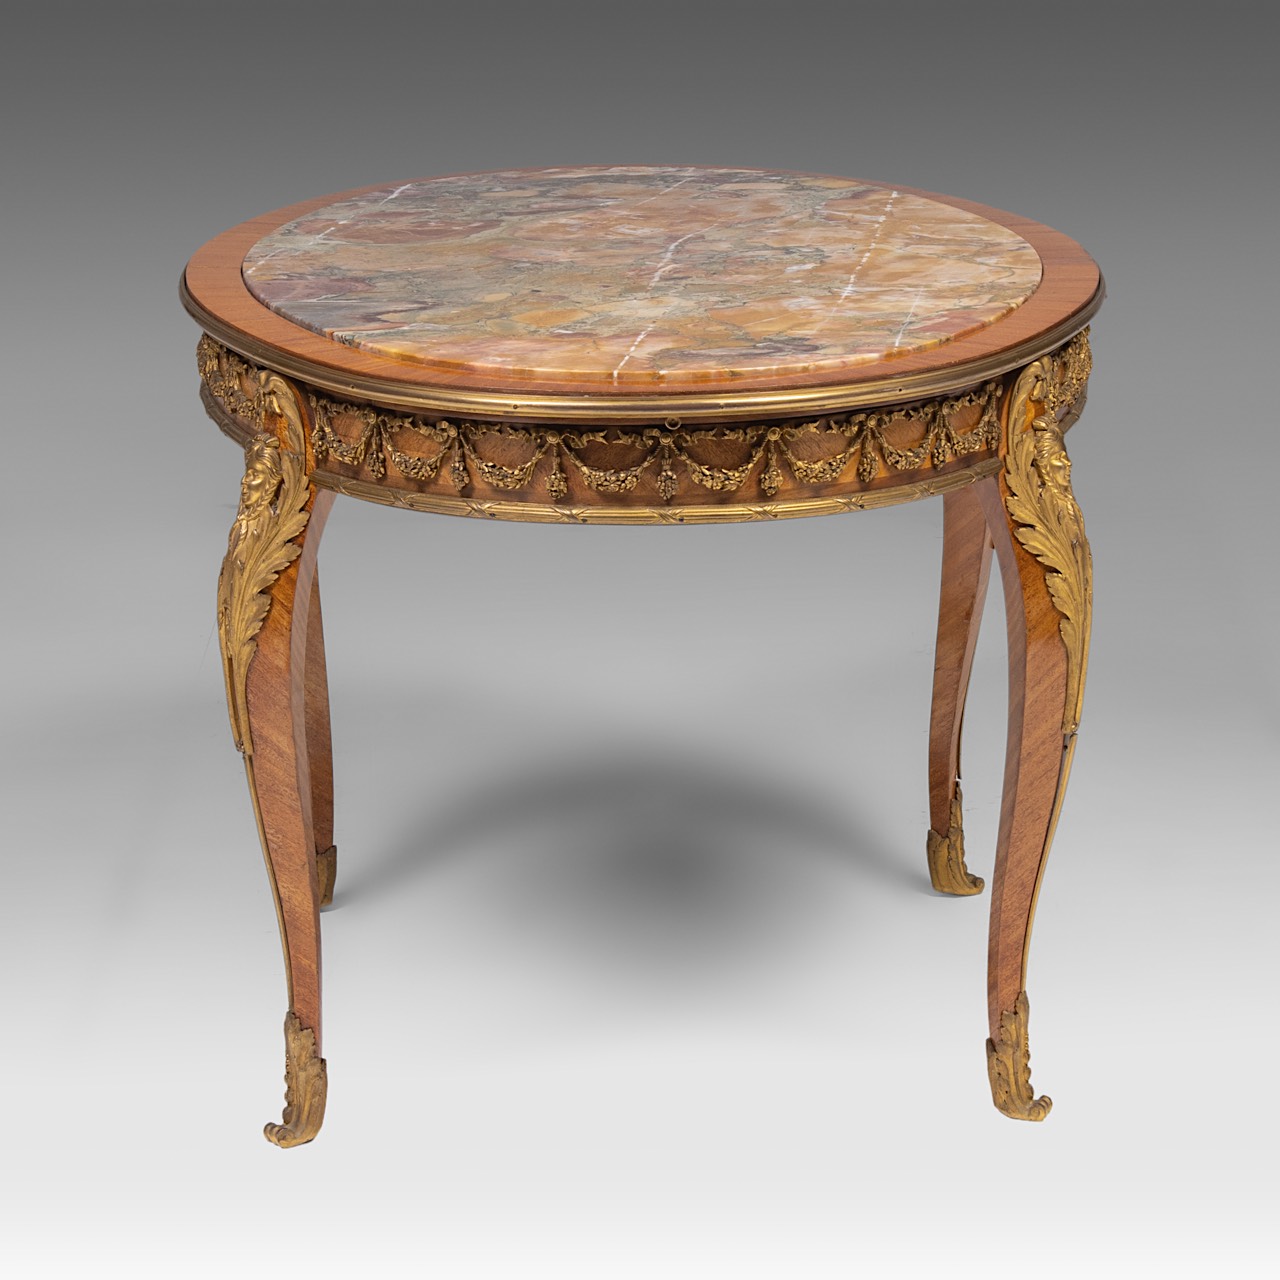 A mahogany marble-topped transitional-style side table with gilt bronze mounts, H 58 cm - W 100 cm - - Image 3 of 7